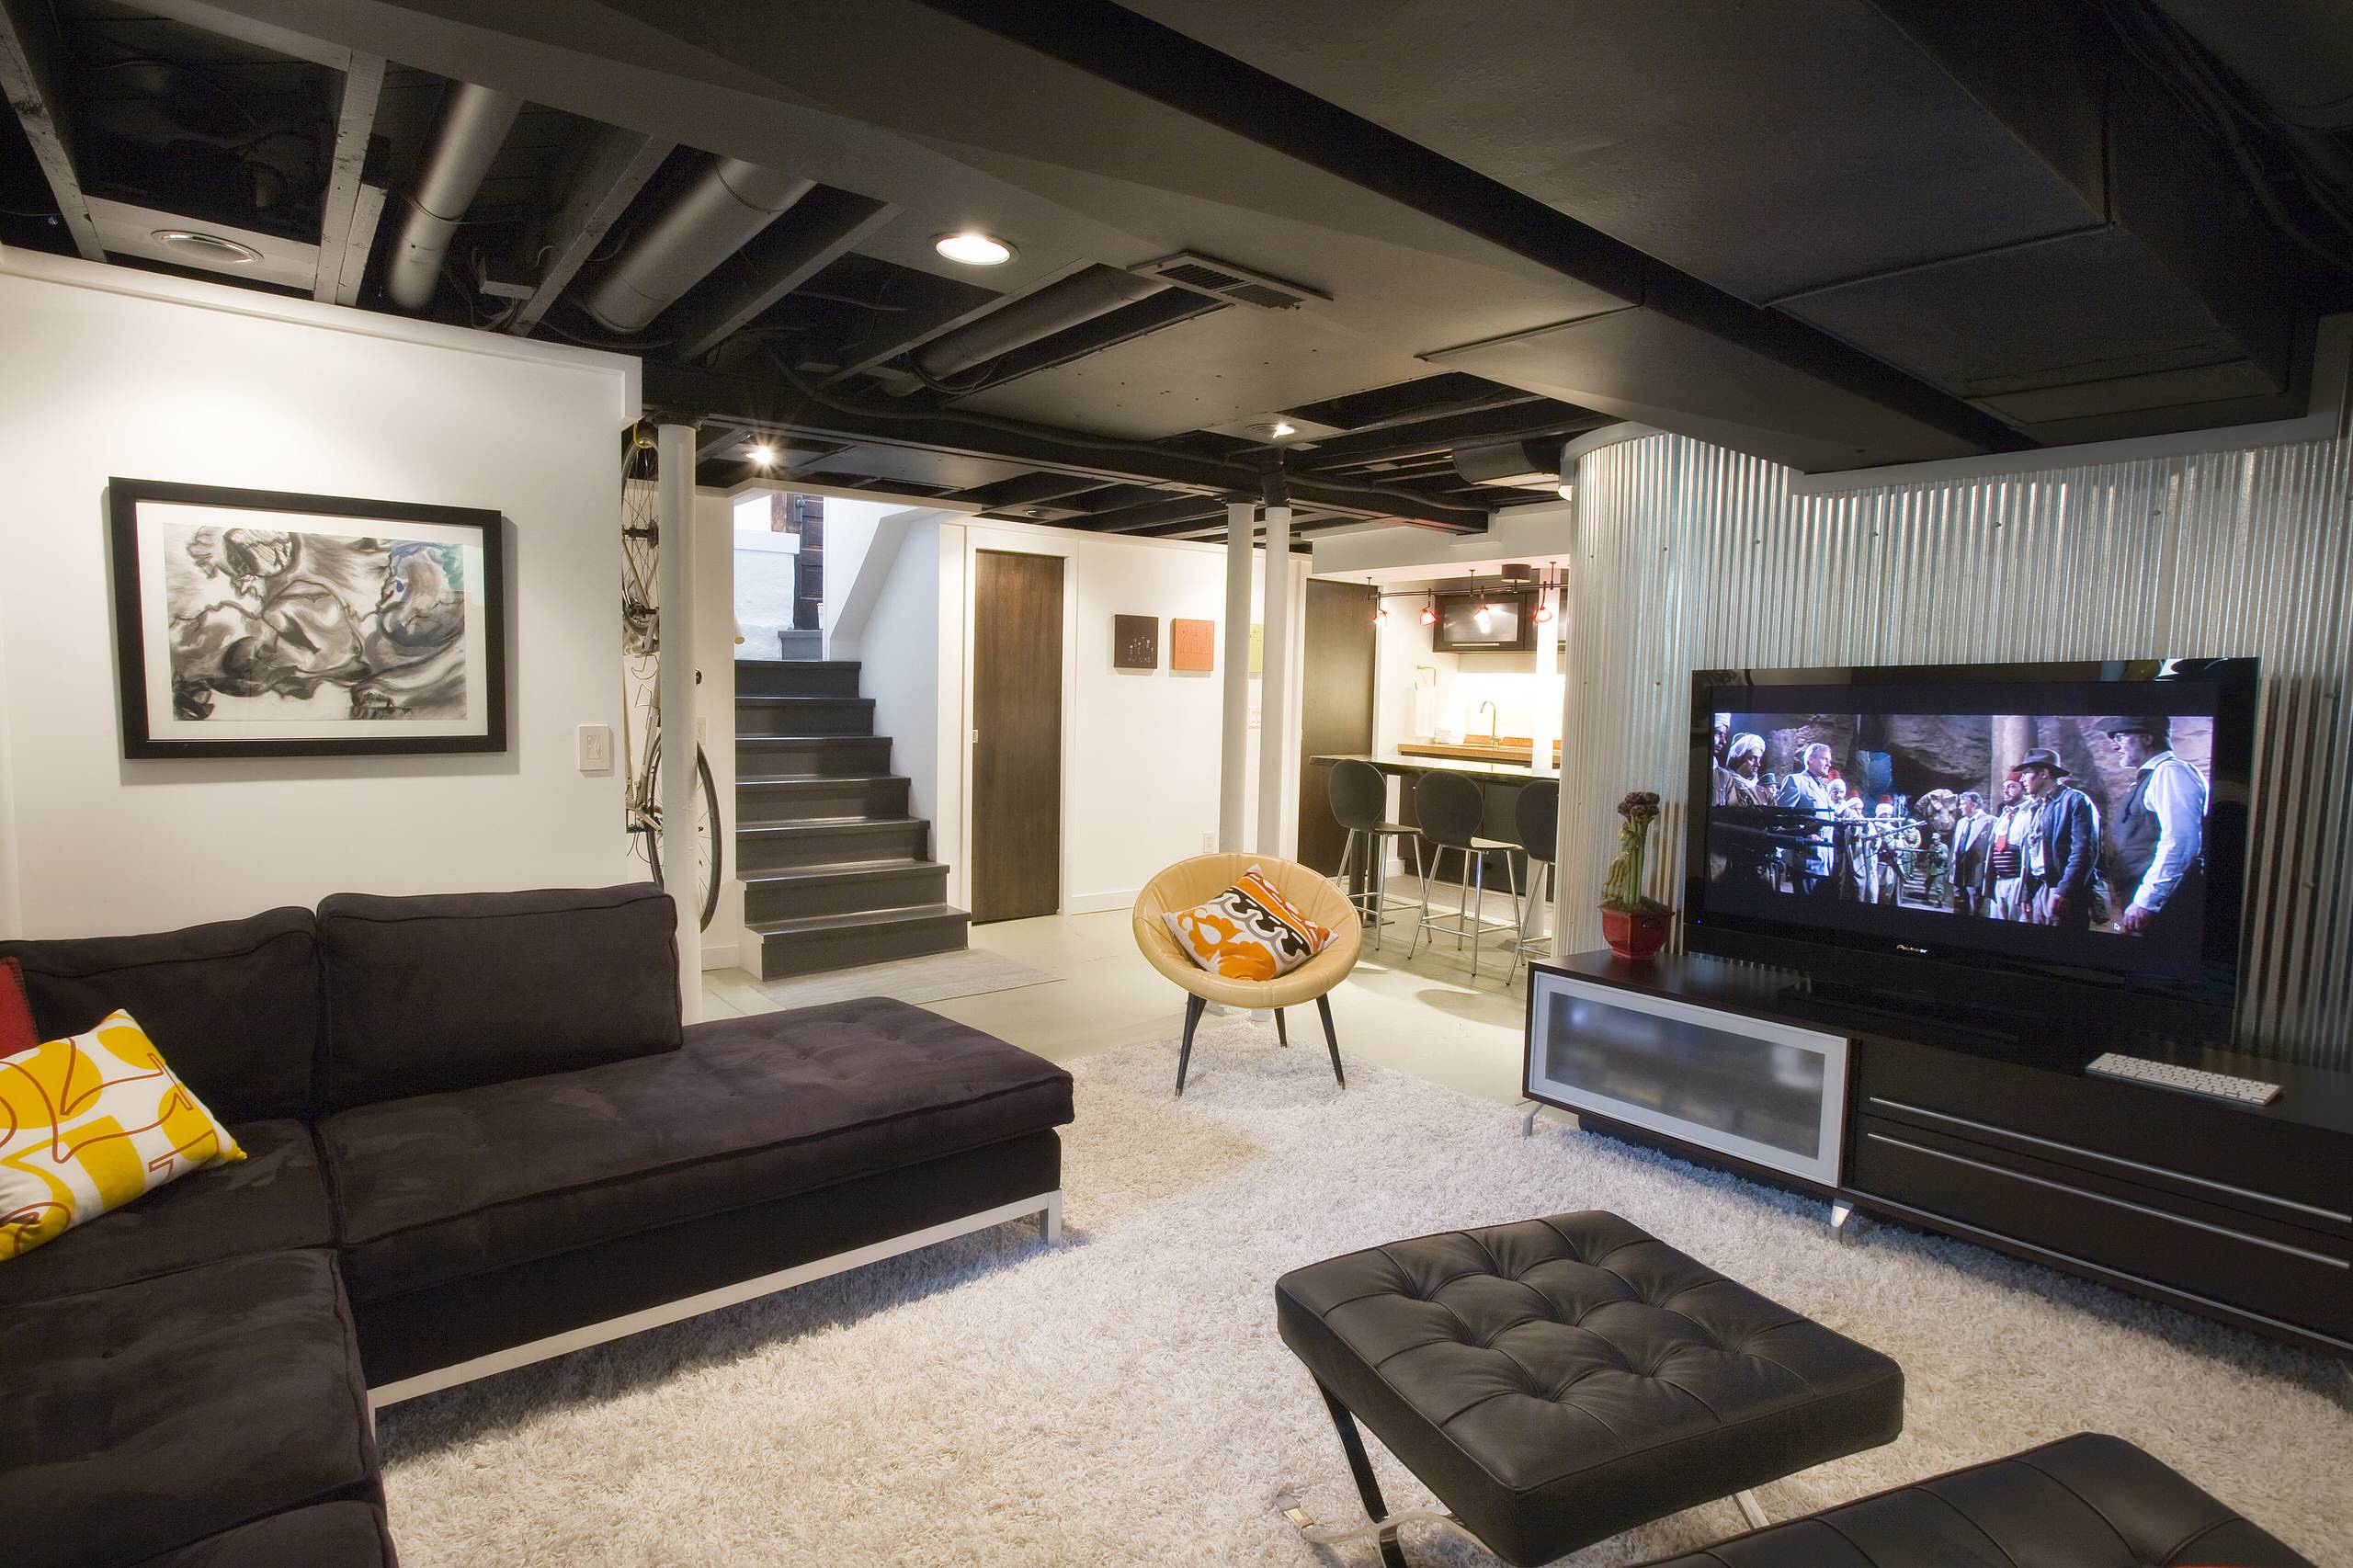 75 Basement with White Walls Ideas You'll Love - January, 2023 | Houzz